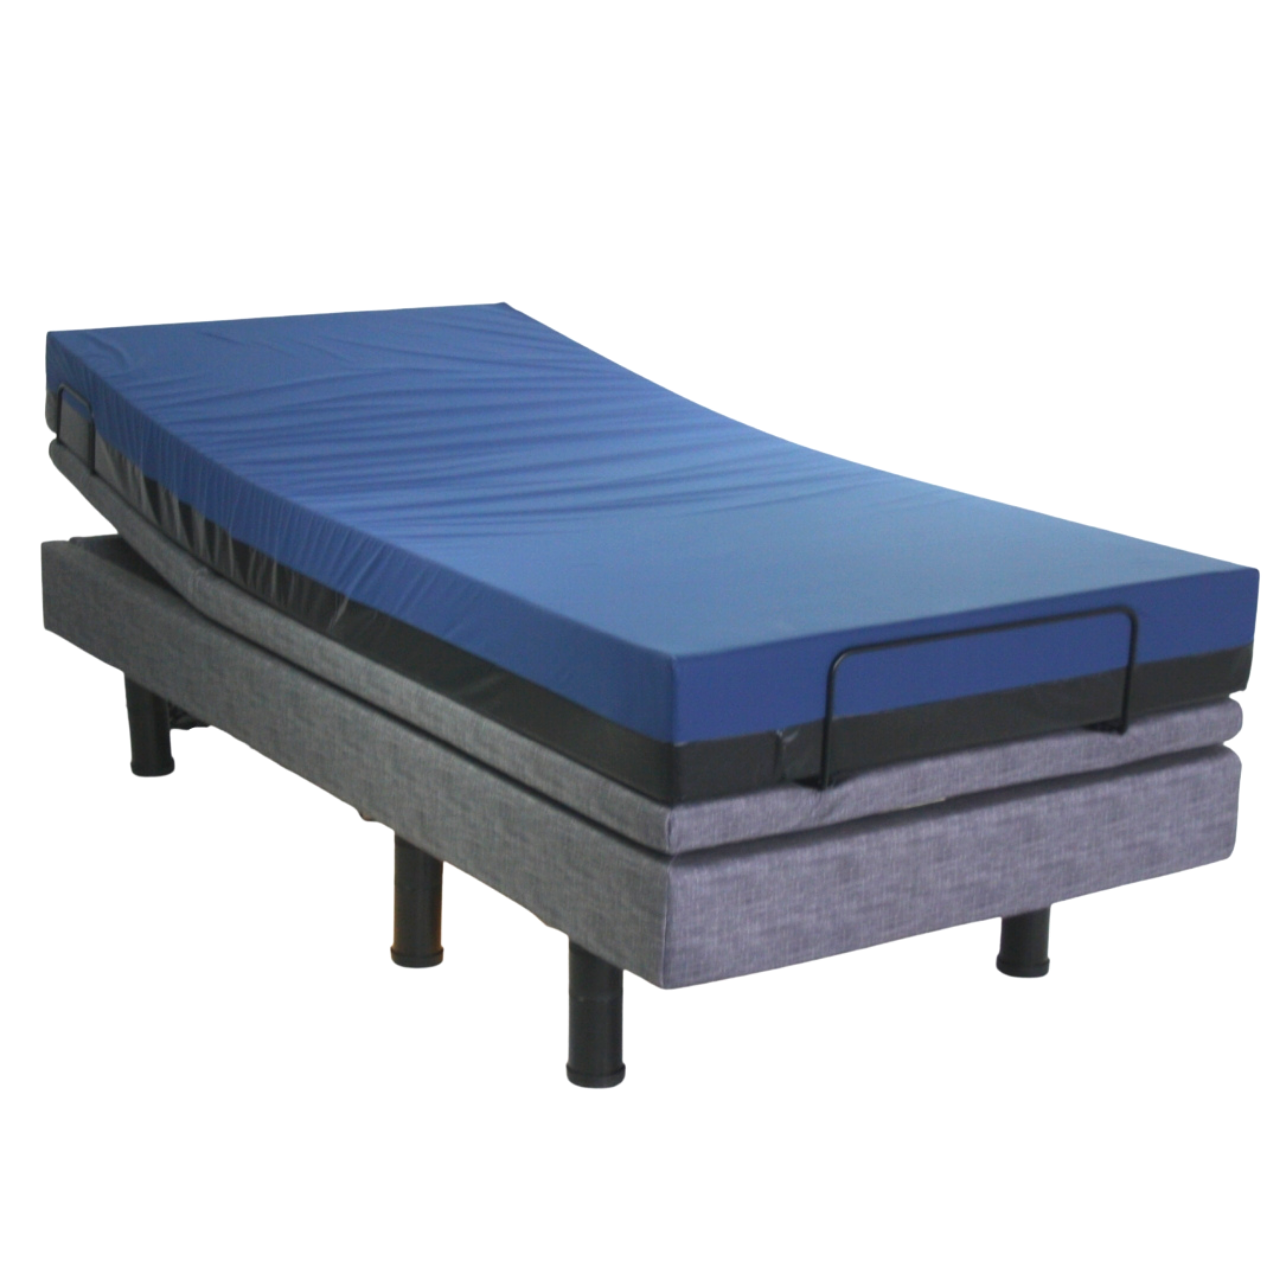 Black and blue mattress on a grey bed frame